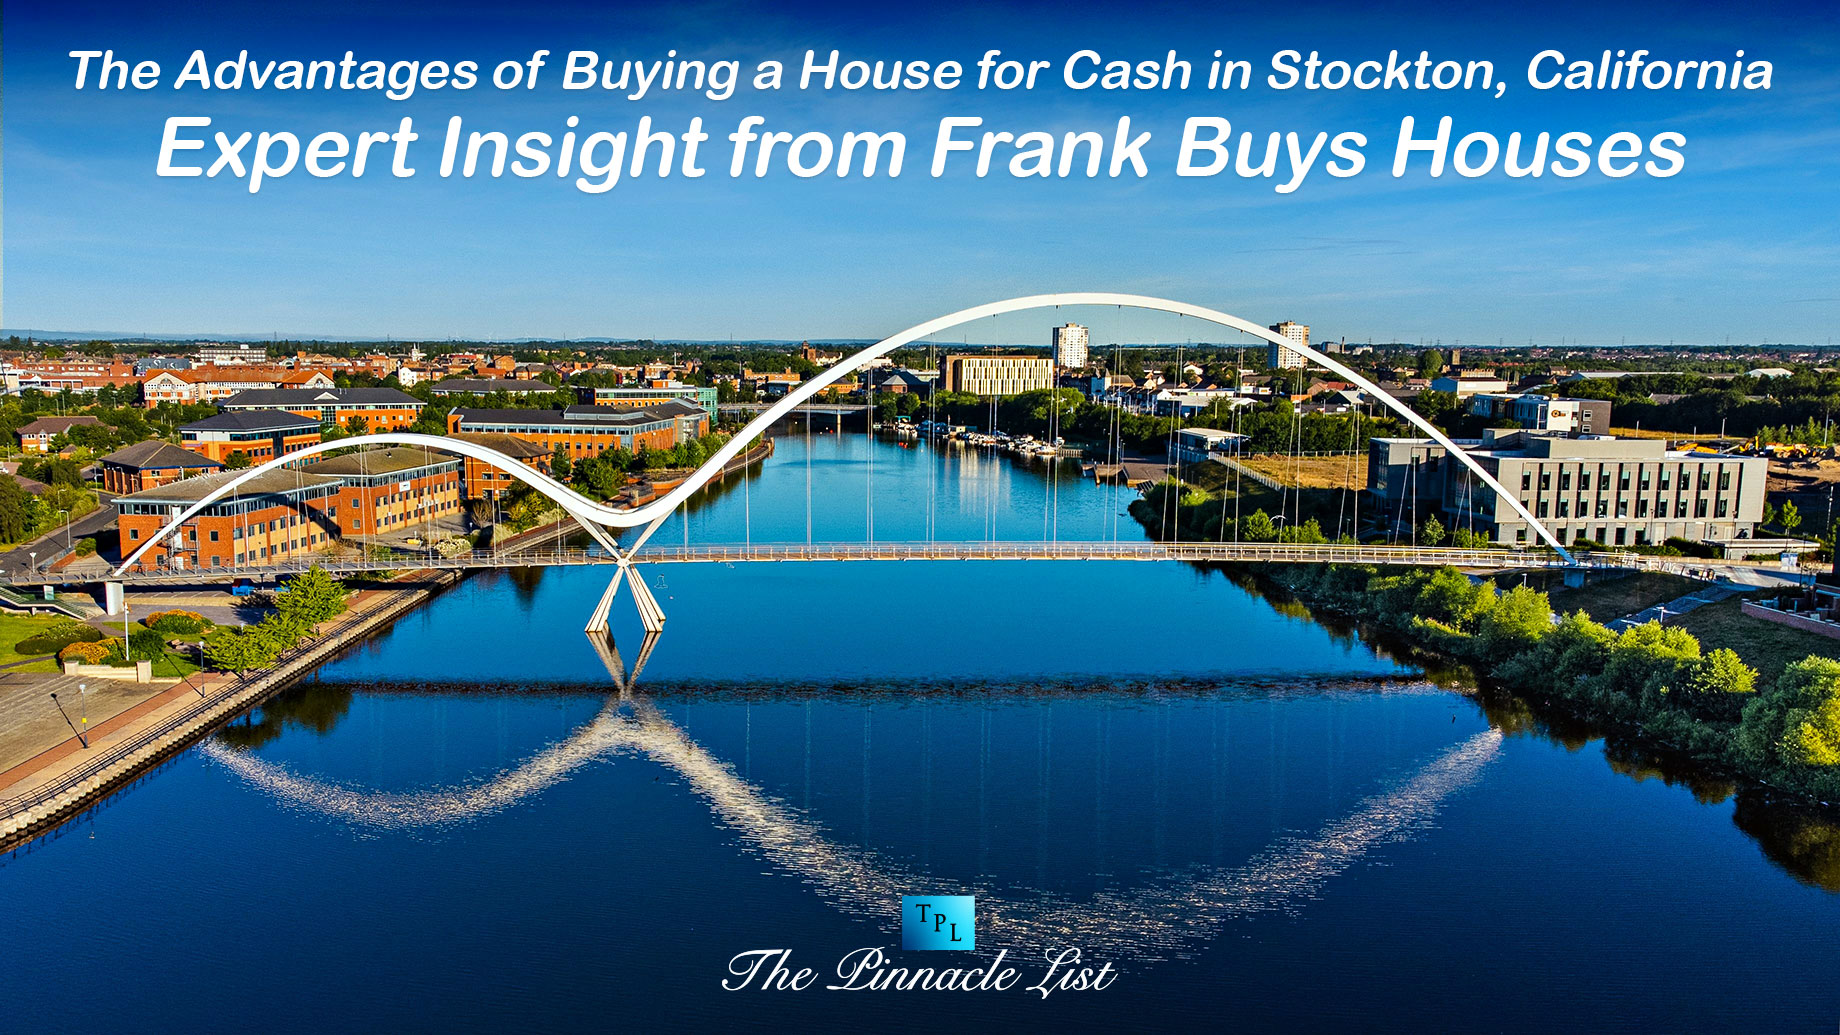 The Advantages of Buying a House for Cash in Stockton, California: Expert Insight from Frank Buys Houses